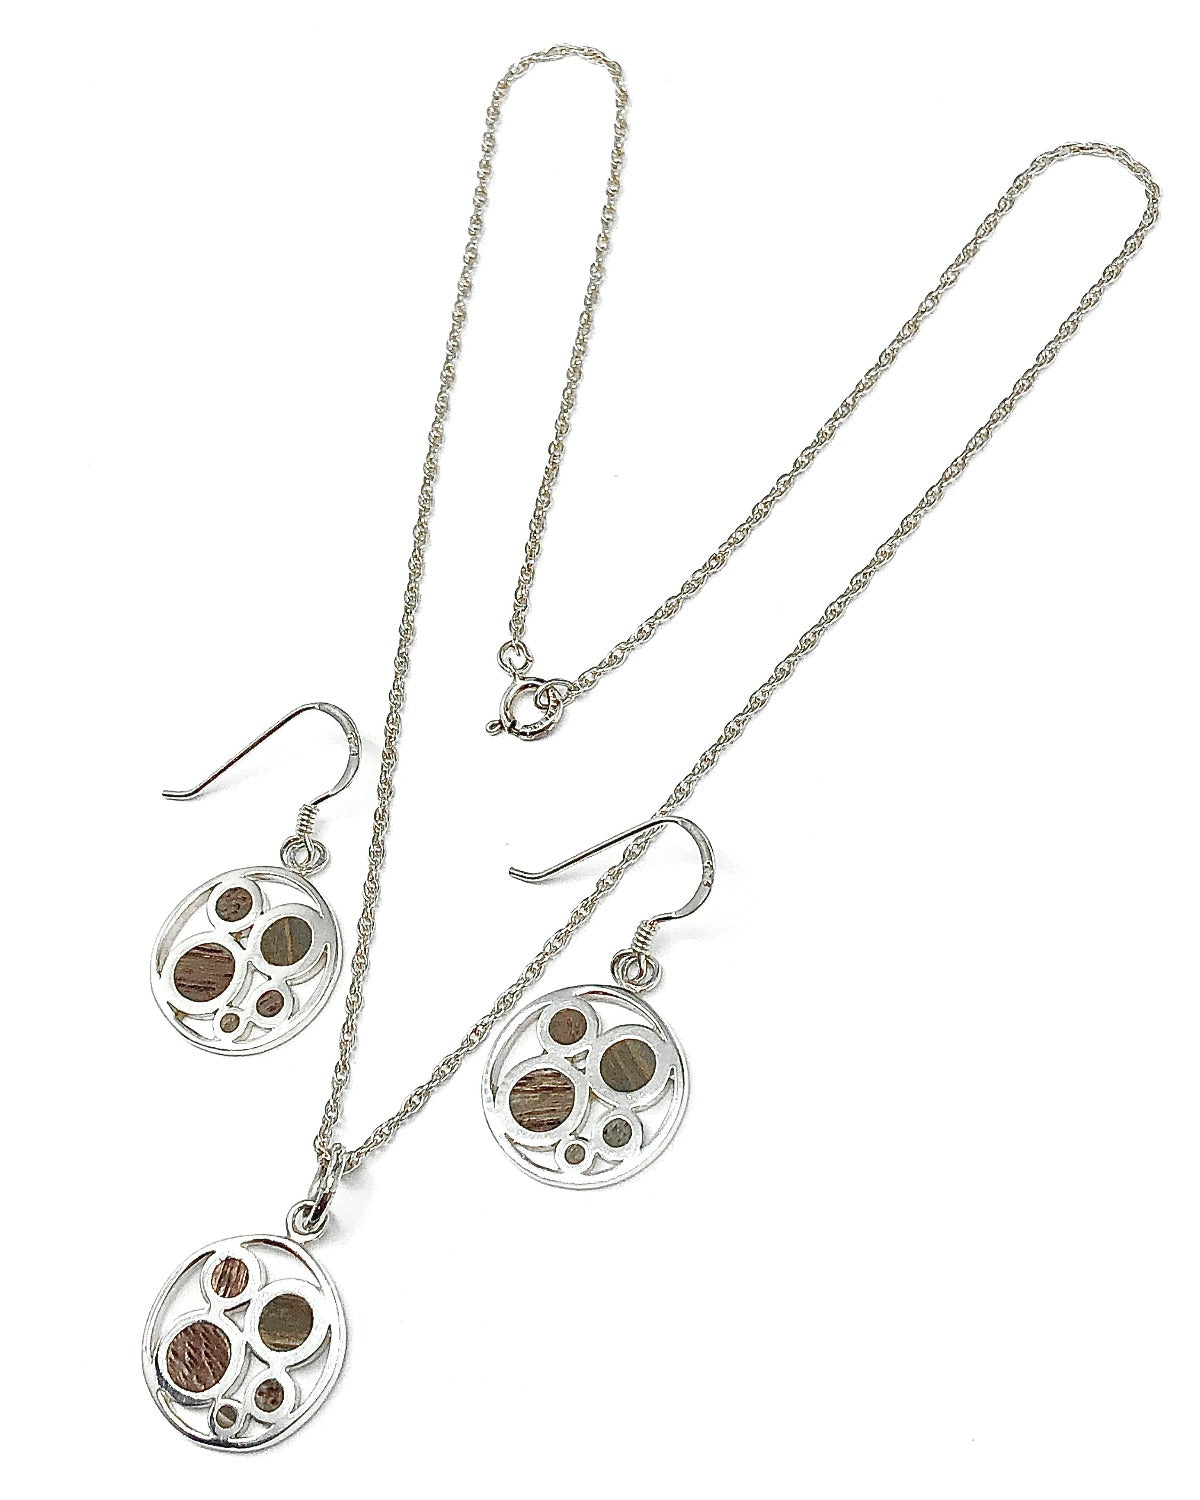 Where are lowest prices online for Real Jewelry? Right here at Blingschlingers.com | Chic Sterling Silver Bamboo Circle Dangle Earrings 15 in Choker Necklace Jewelry set